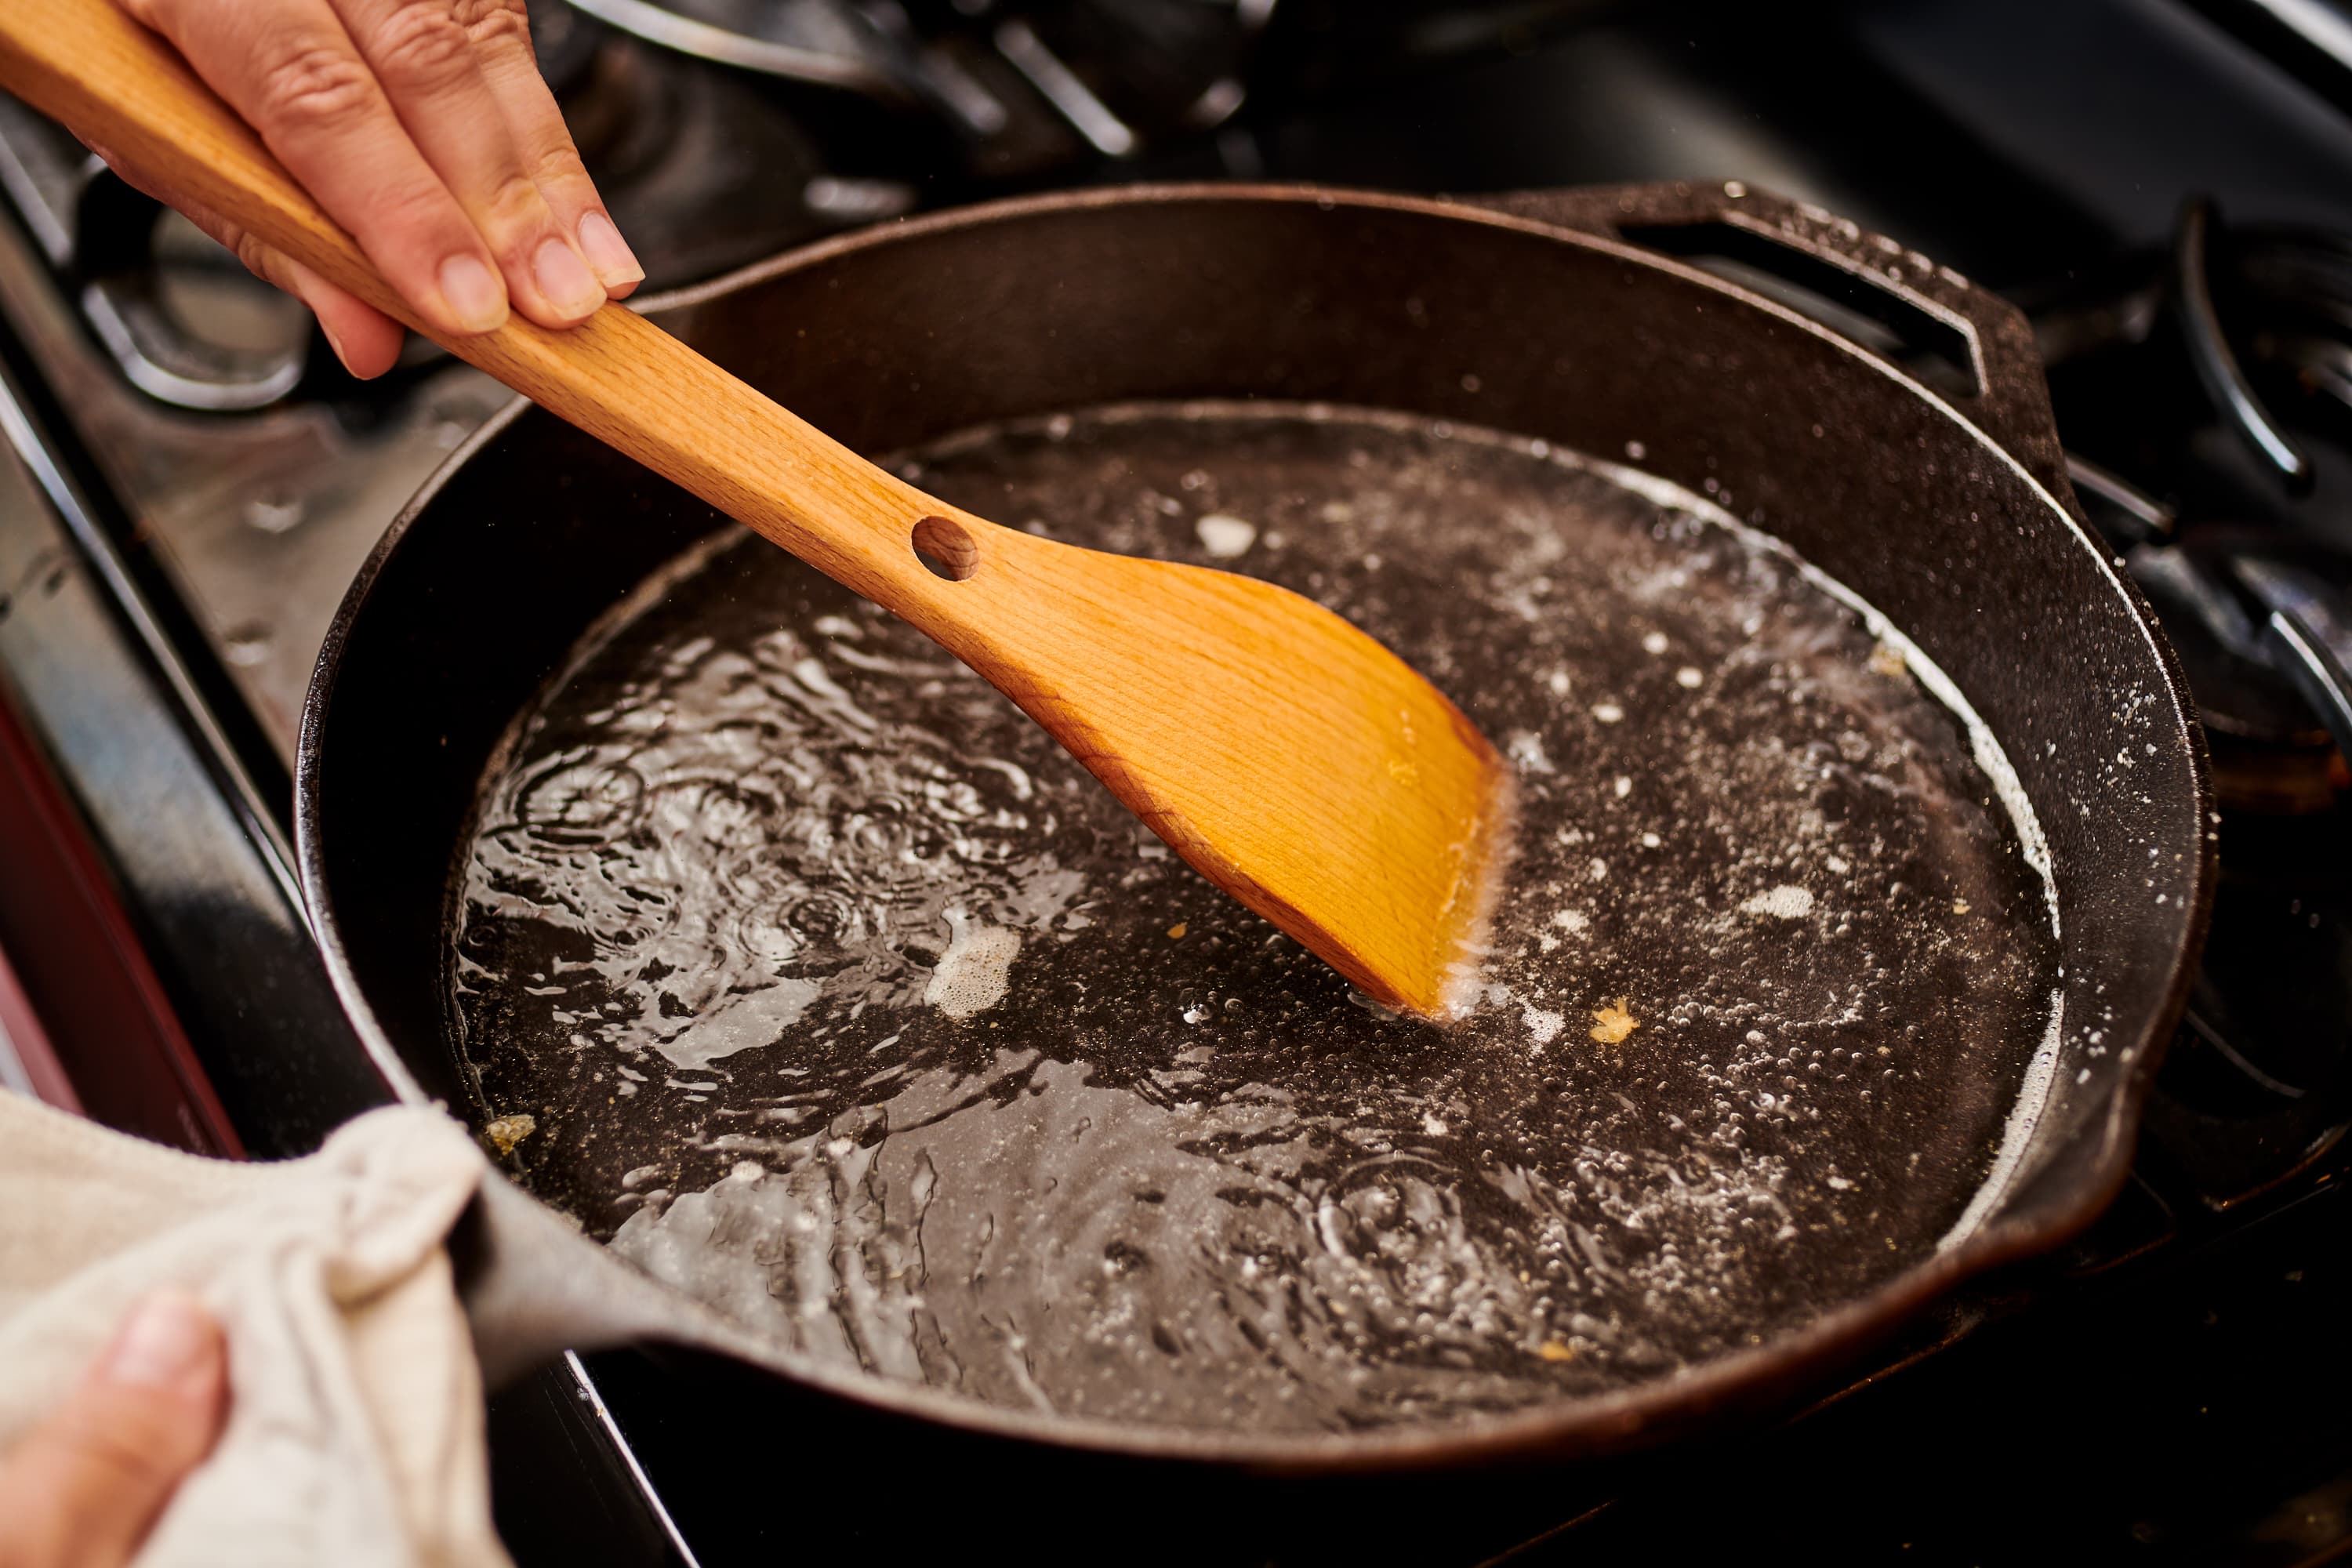 12 Top-Rated  Finds for Cleaning and Storing Your Cast Iron Skillet  (Starting at $3!)